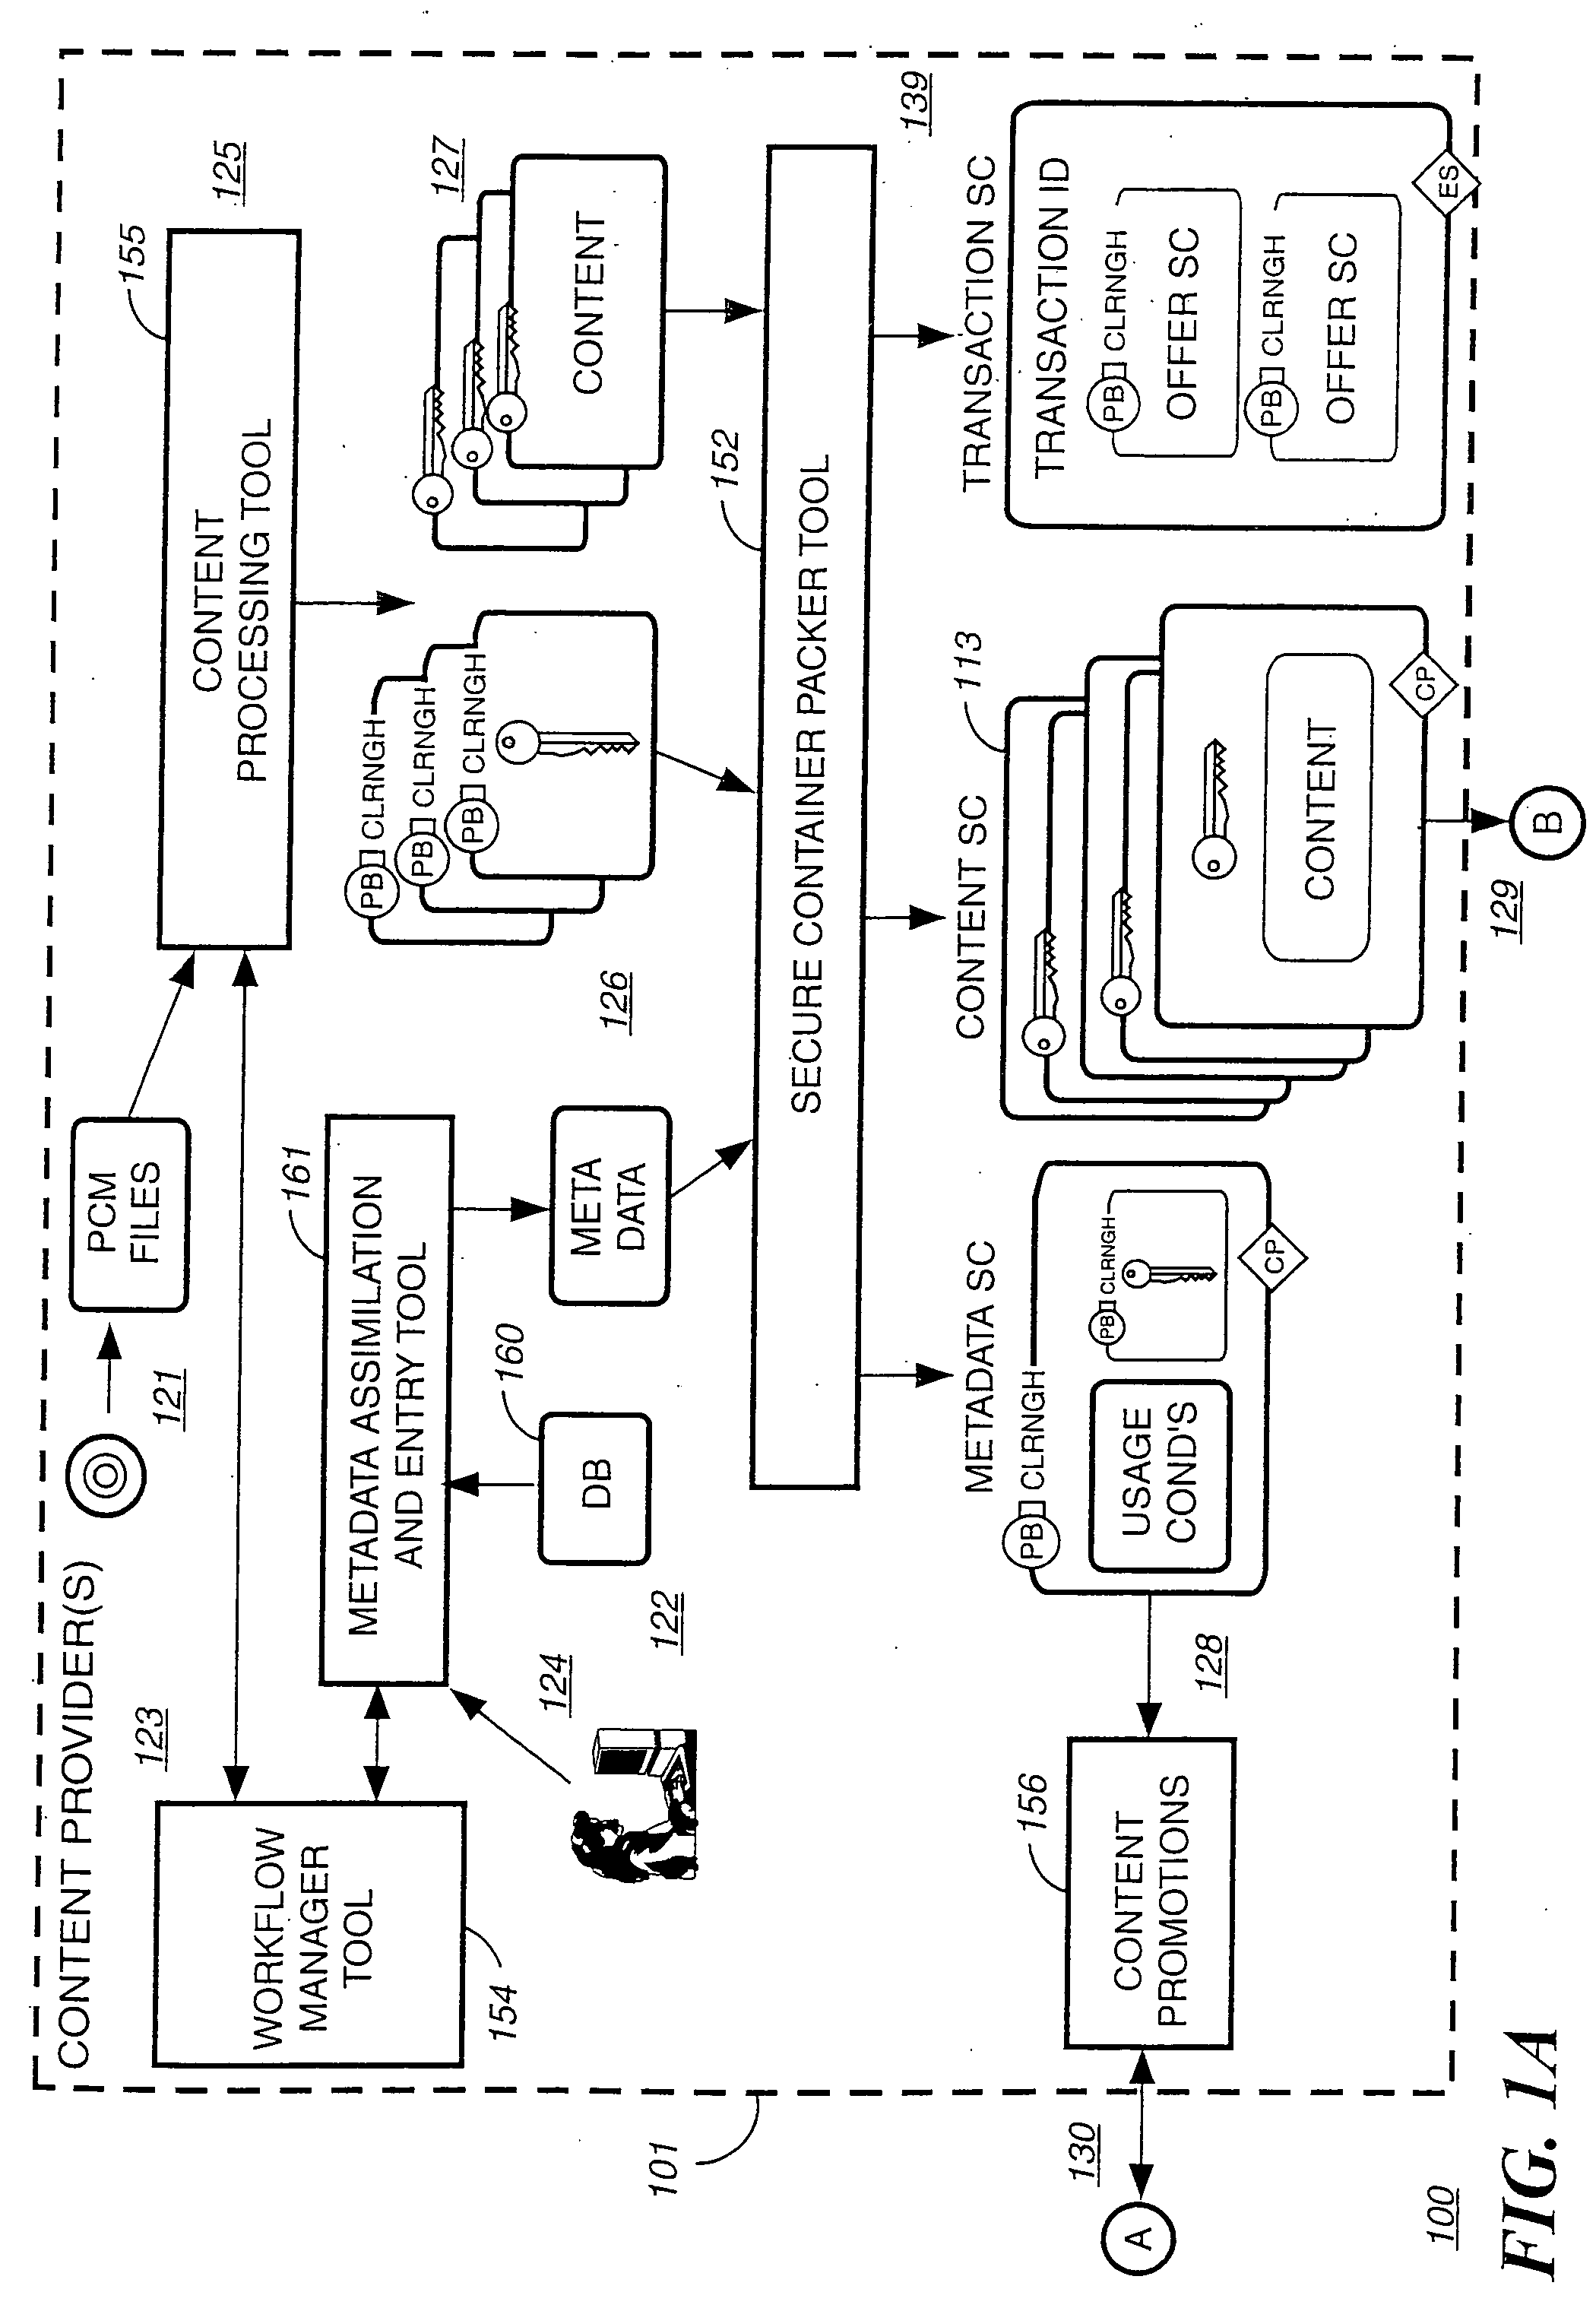 Method and system for preventing unauthorized rerecording of multimedia content